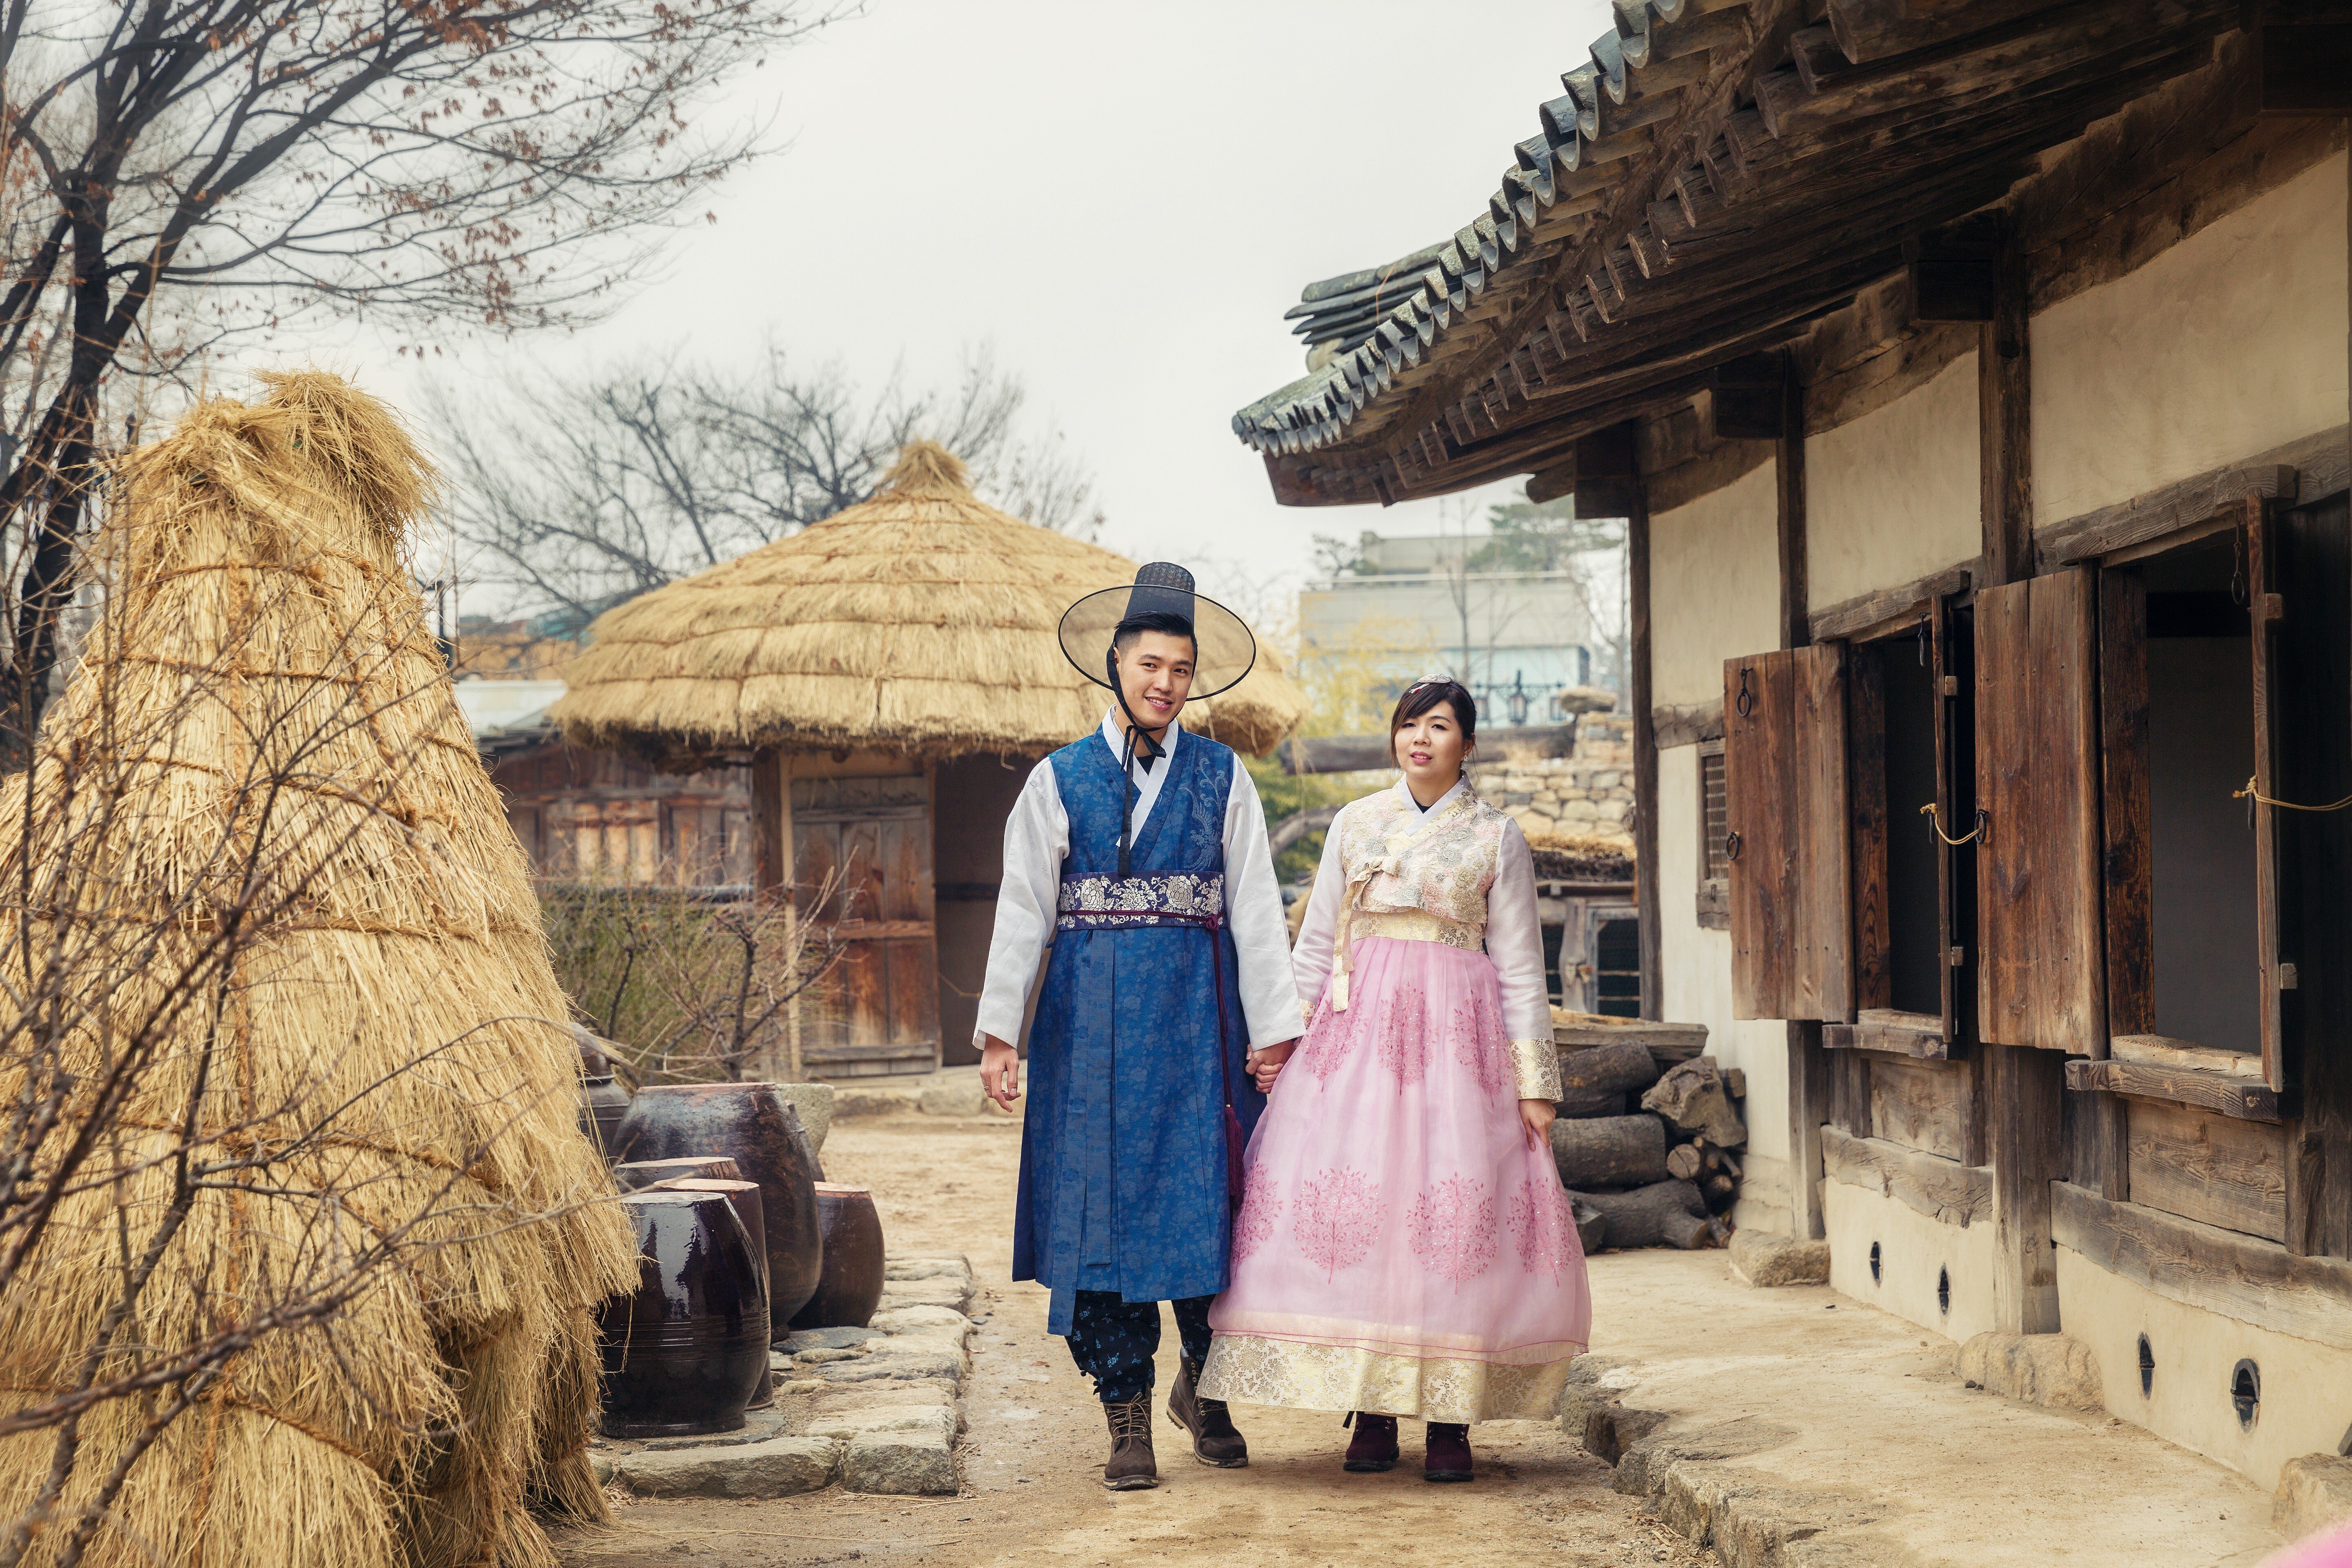 What is the national dress of Korea? - Quora